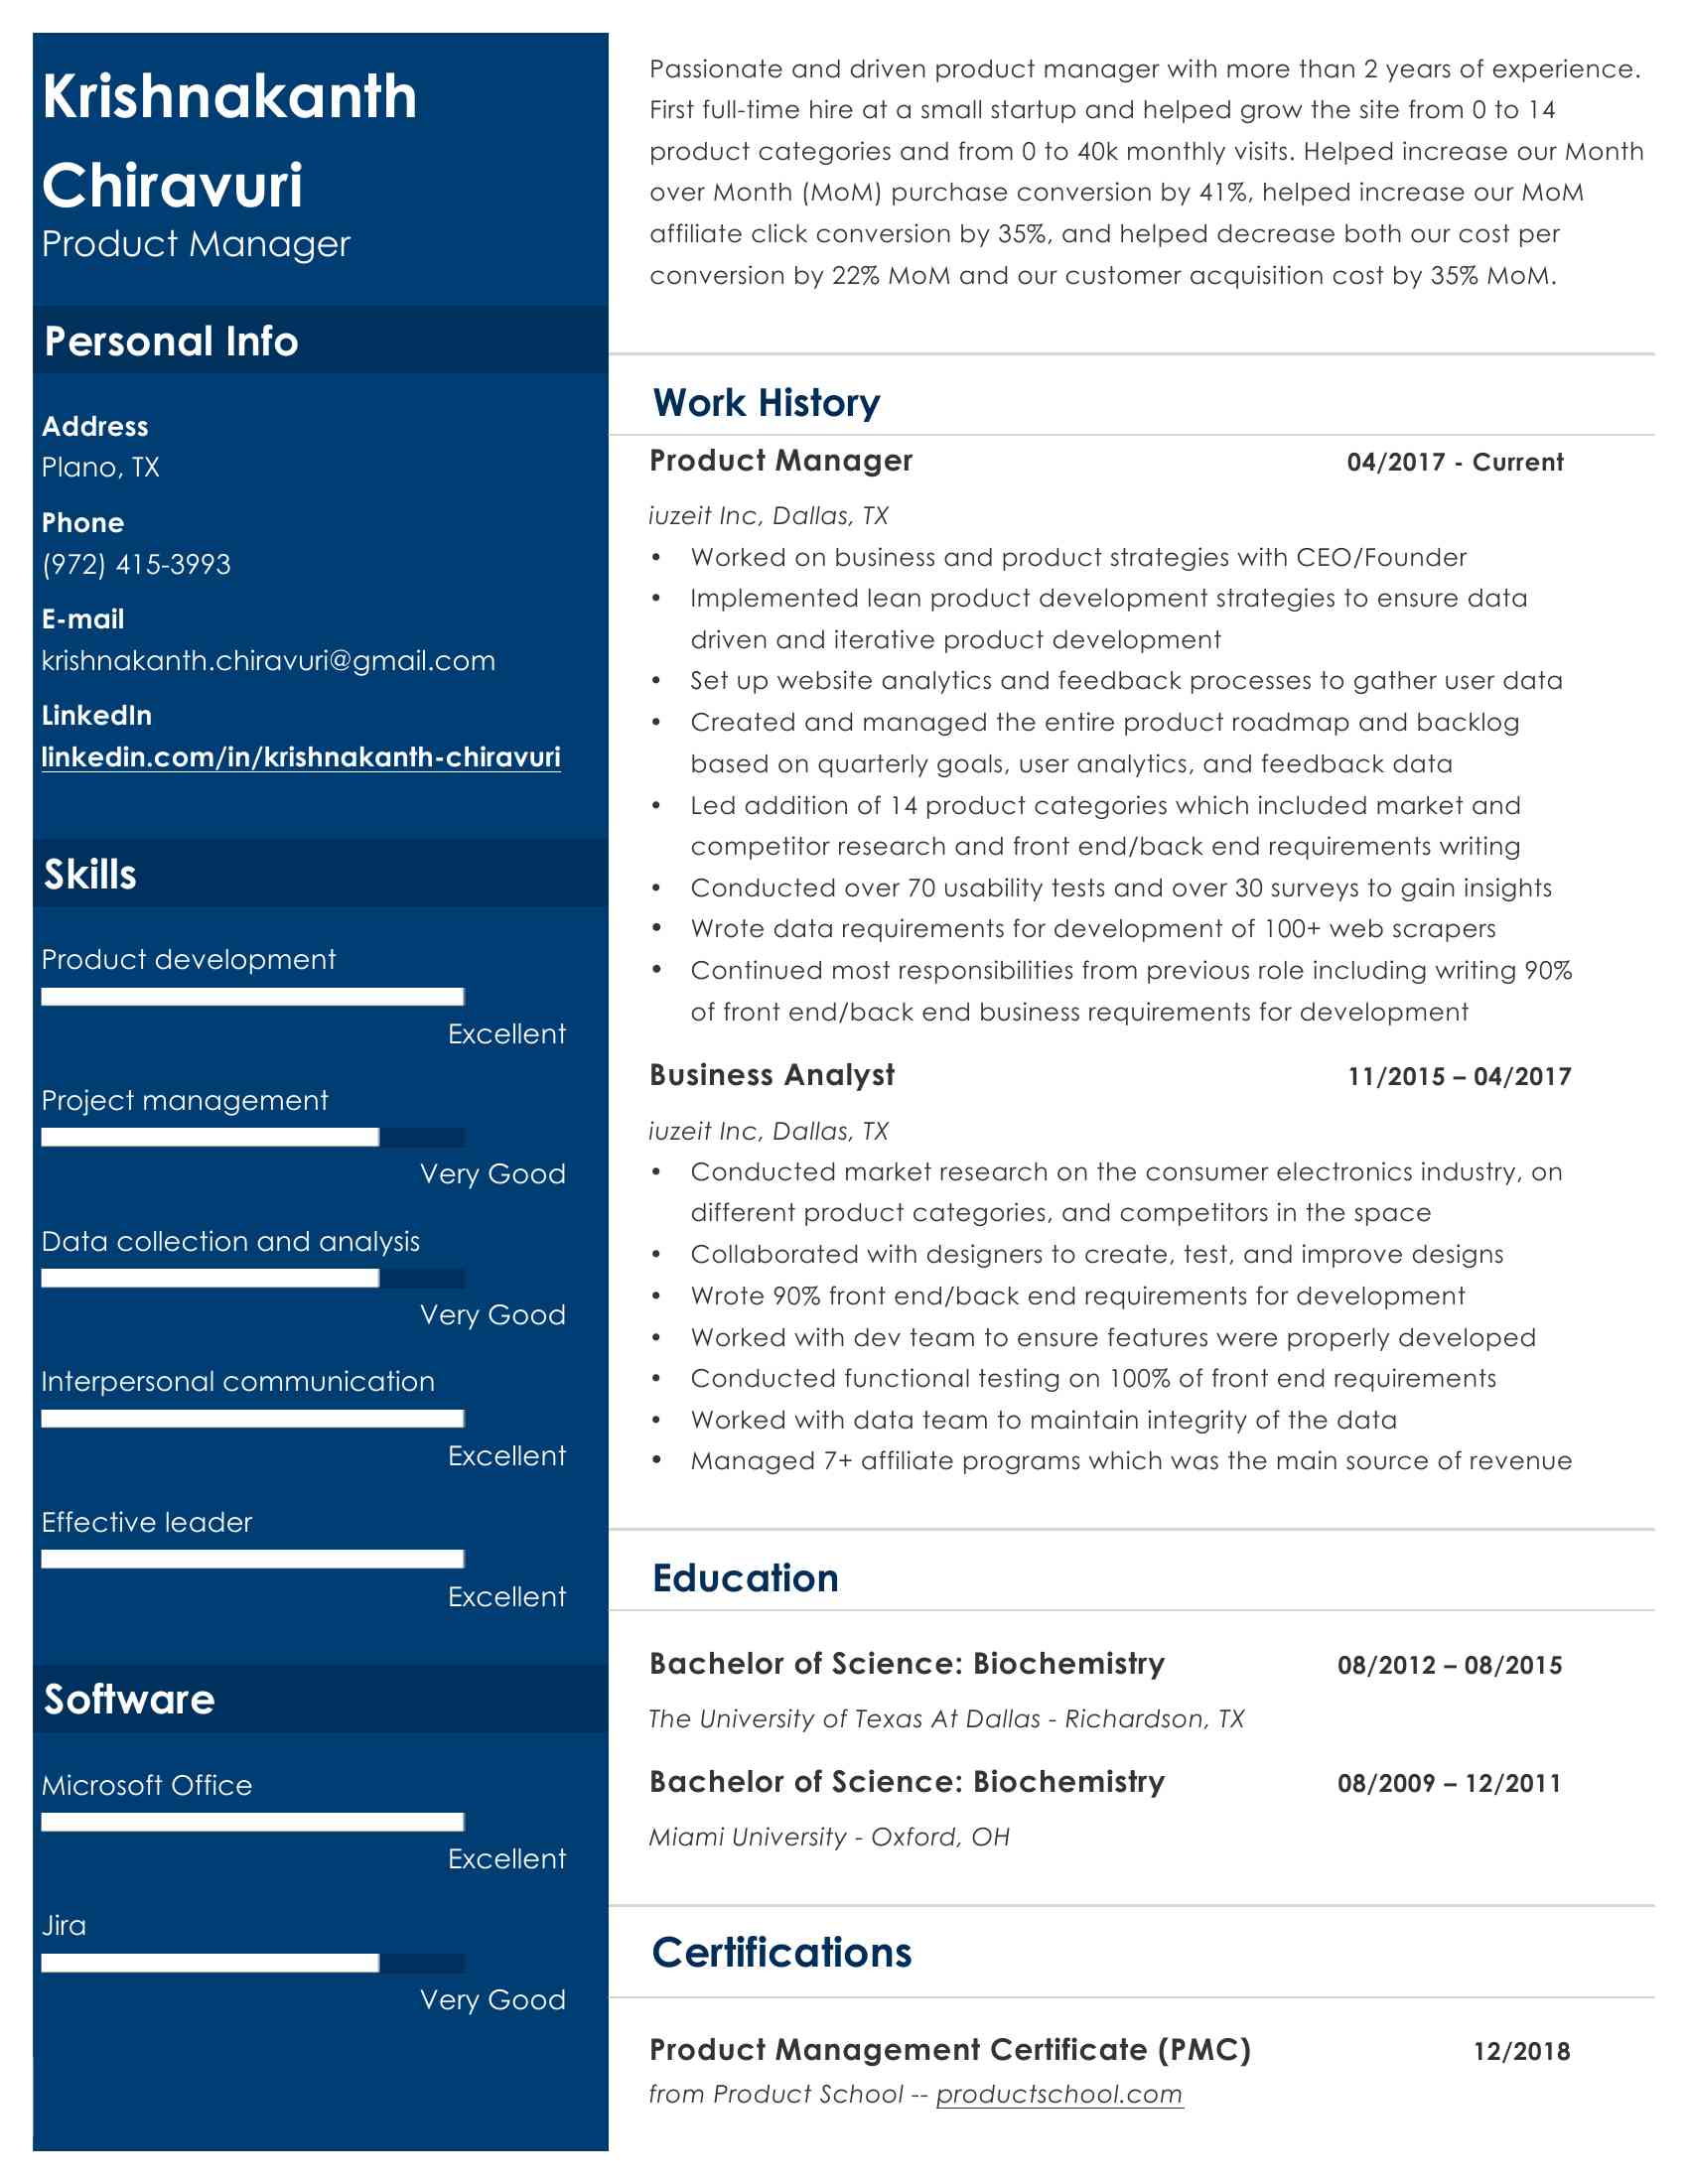 <BR>Microsoft Word - Resume 2019_1 page version_July 31st_final version.docx<BR>Krishnakanth <BR>Passionate and driven product manager with more than 2 years of experience. <BR>First ful -time hire at a smal startup and helped grow the site from 0 to 14 <BR>Chiravuri <BR>product categories and from 0 to 40k monthly visits. Helped increase our Month <BR>over Month (MoM) purchase conversion by 41%, helped increase our MoM <BR>Product Manager <BR>affiliate click conversion by 35%, and helped decrease both our cost per <BR>conversion by 22% MoM and our customer acquisition cost by 35% MoM.  Personal Info Work History <BR>Address <BR>Plano, TX <BR>  Product Manager                        04/2017 - Current <BR>Phone <BR>iuzeit Inc, Dal as, TX <BR>(XXX) XXX-XXXX <BR>• Worked on business and product strategies with CEO/Founder <BR>E-mail <BR>• Implemented lean product development strategies to ensure data <BR>driven and iterative product development <BR>XXXX@XXXX.XXX <BR>• Set up website analytics and feedback processes to gather user data <BR>LinkedIn <BR>• Created and managed the entire product roadmap and backlog <BR>linkedin.com/in/krishnakanth-chiravuri <BR>based on quarterly goals, user analytics, and feedback data <BR>• Led addition of XXXXXX categories which included market and competitor research and front end/back end requirements writing <BR>Skil s <BR>• Conducted over 70 usability tests and over 30 surveys to gain insights • Wrote data requirements for development of 100+ web scrapers <BR>Product development <BR>• Continued most responsibilities from previous role including writing 90% of front end/back end business requirements for development <BR>Excel ent <BR>  Business Analyst                         11/2015 – 04/2017 <BR>Project management iuzeit Inc, Dal as, TX <BR>Very Good <BR>• Conducted market research on the consumer electronics industry, on <BR>different product categories, and competitors in the space <BR>Data col ection and analysis <BR>• Col aborated with designers to create, test, and improve designs Very Good <BR>• Wrote 90% front end/back end requirements for development <BR>• Worked with dev team to ensure features were properly developed <BR>Interpersonal communication <BR>• Conducted functional testing on 100% of front end requirements • Worked with data team to maintain integrity of the data <BR>Excel ent <BR>• Managed 7+ affiliate programs which was the main source of revenue <BR>Effective leader Education <BR>Excel ent   Bachelor of Science: Biochemistry          08/2012 – 08/2015 <BR>Software <BR>The University of Texas At Dal as - Richardson, TX Microsoft Office <BR>  Bachelor of Science: Biochemistry          08/2009 – 12/2011 Miami University - Oxford, OH <BR>Excel ent Jira Certifications <BR>Very Good   Product Management Certificate (PMC)              12/2018 <BR>from Product School -- productschool.com                                             .<BR>